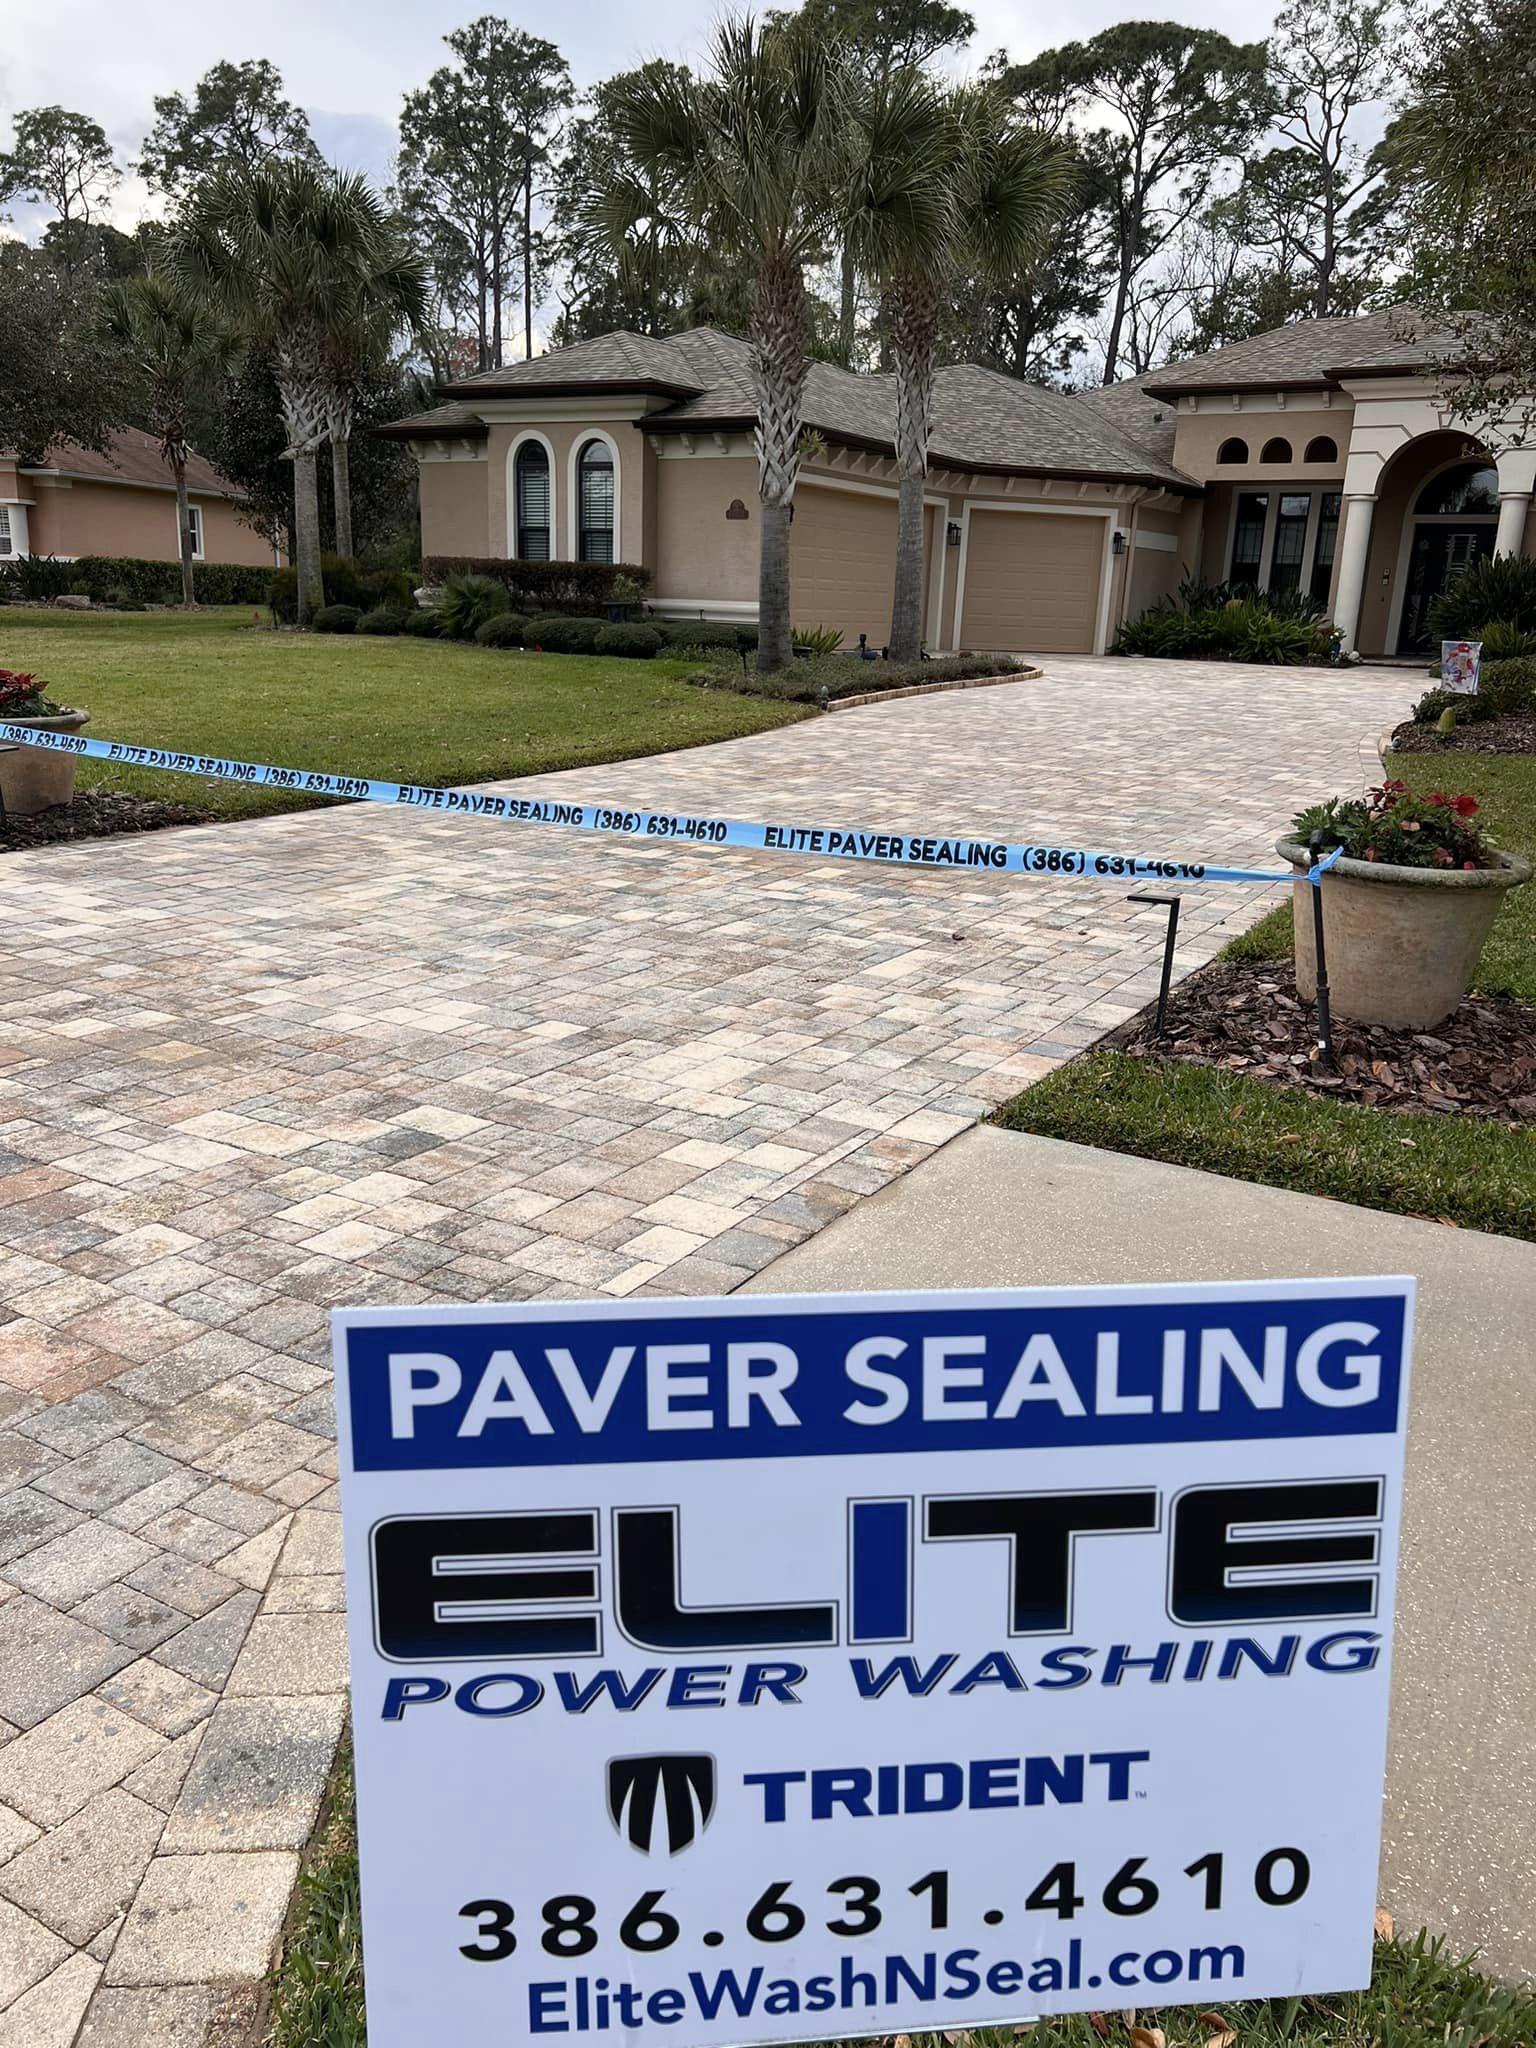 St Augustine Beach paver sealing services